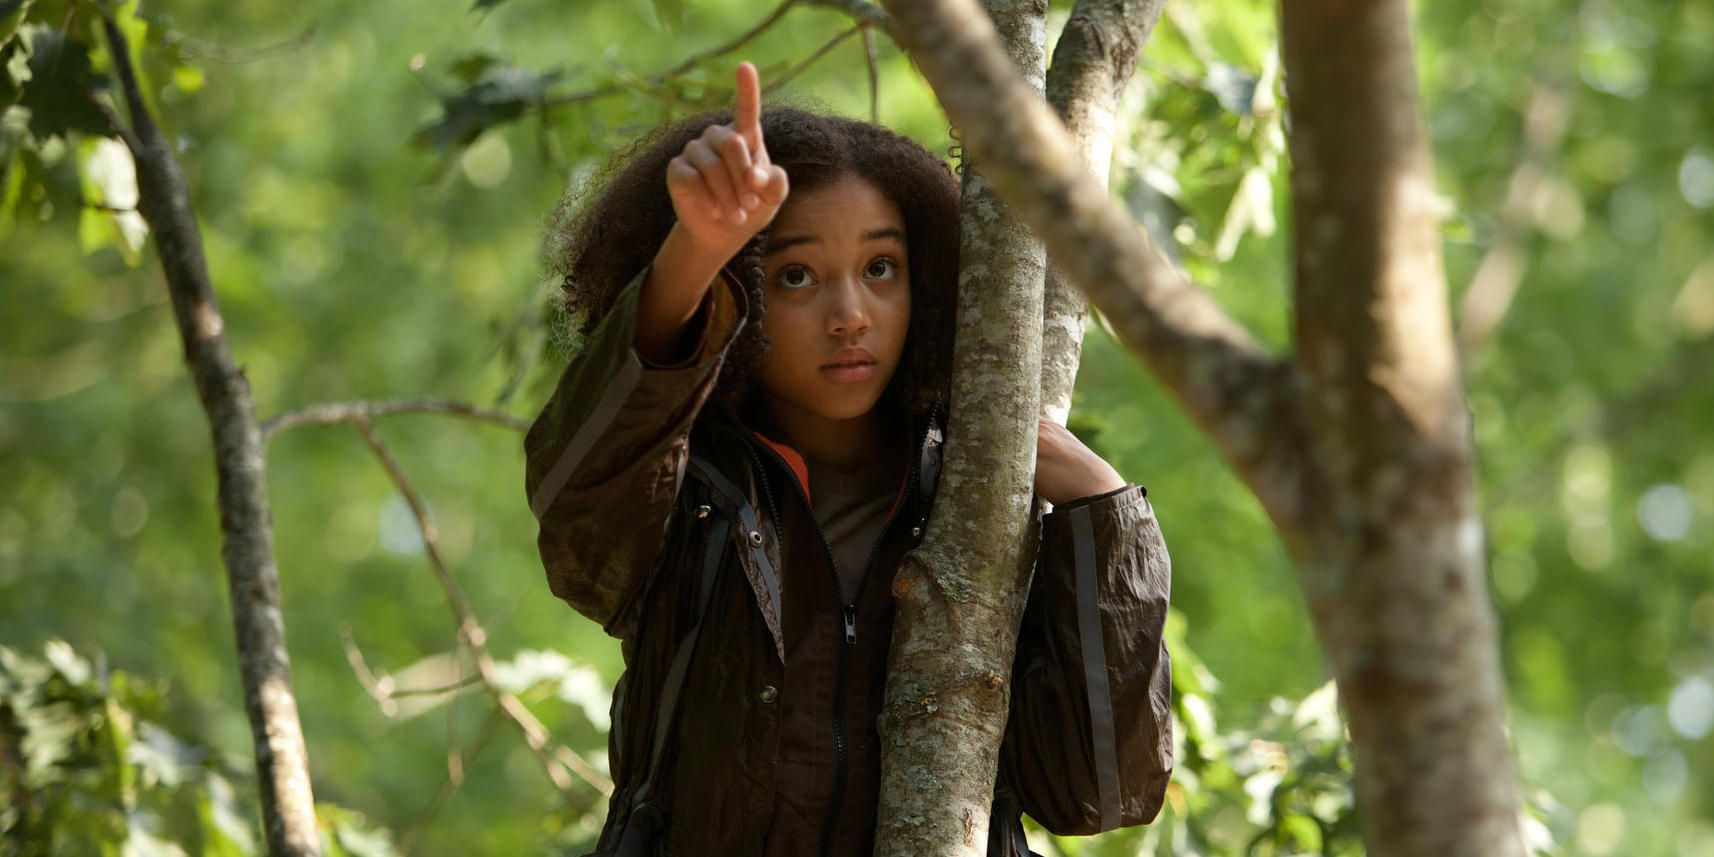 Actor Amandla Stenberg as Rue pointing to a tracker jacker nest in The Hunger Games